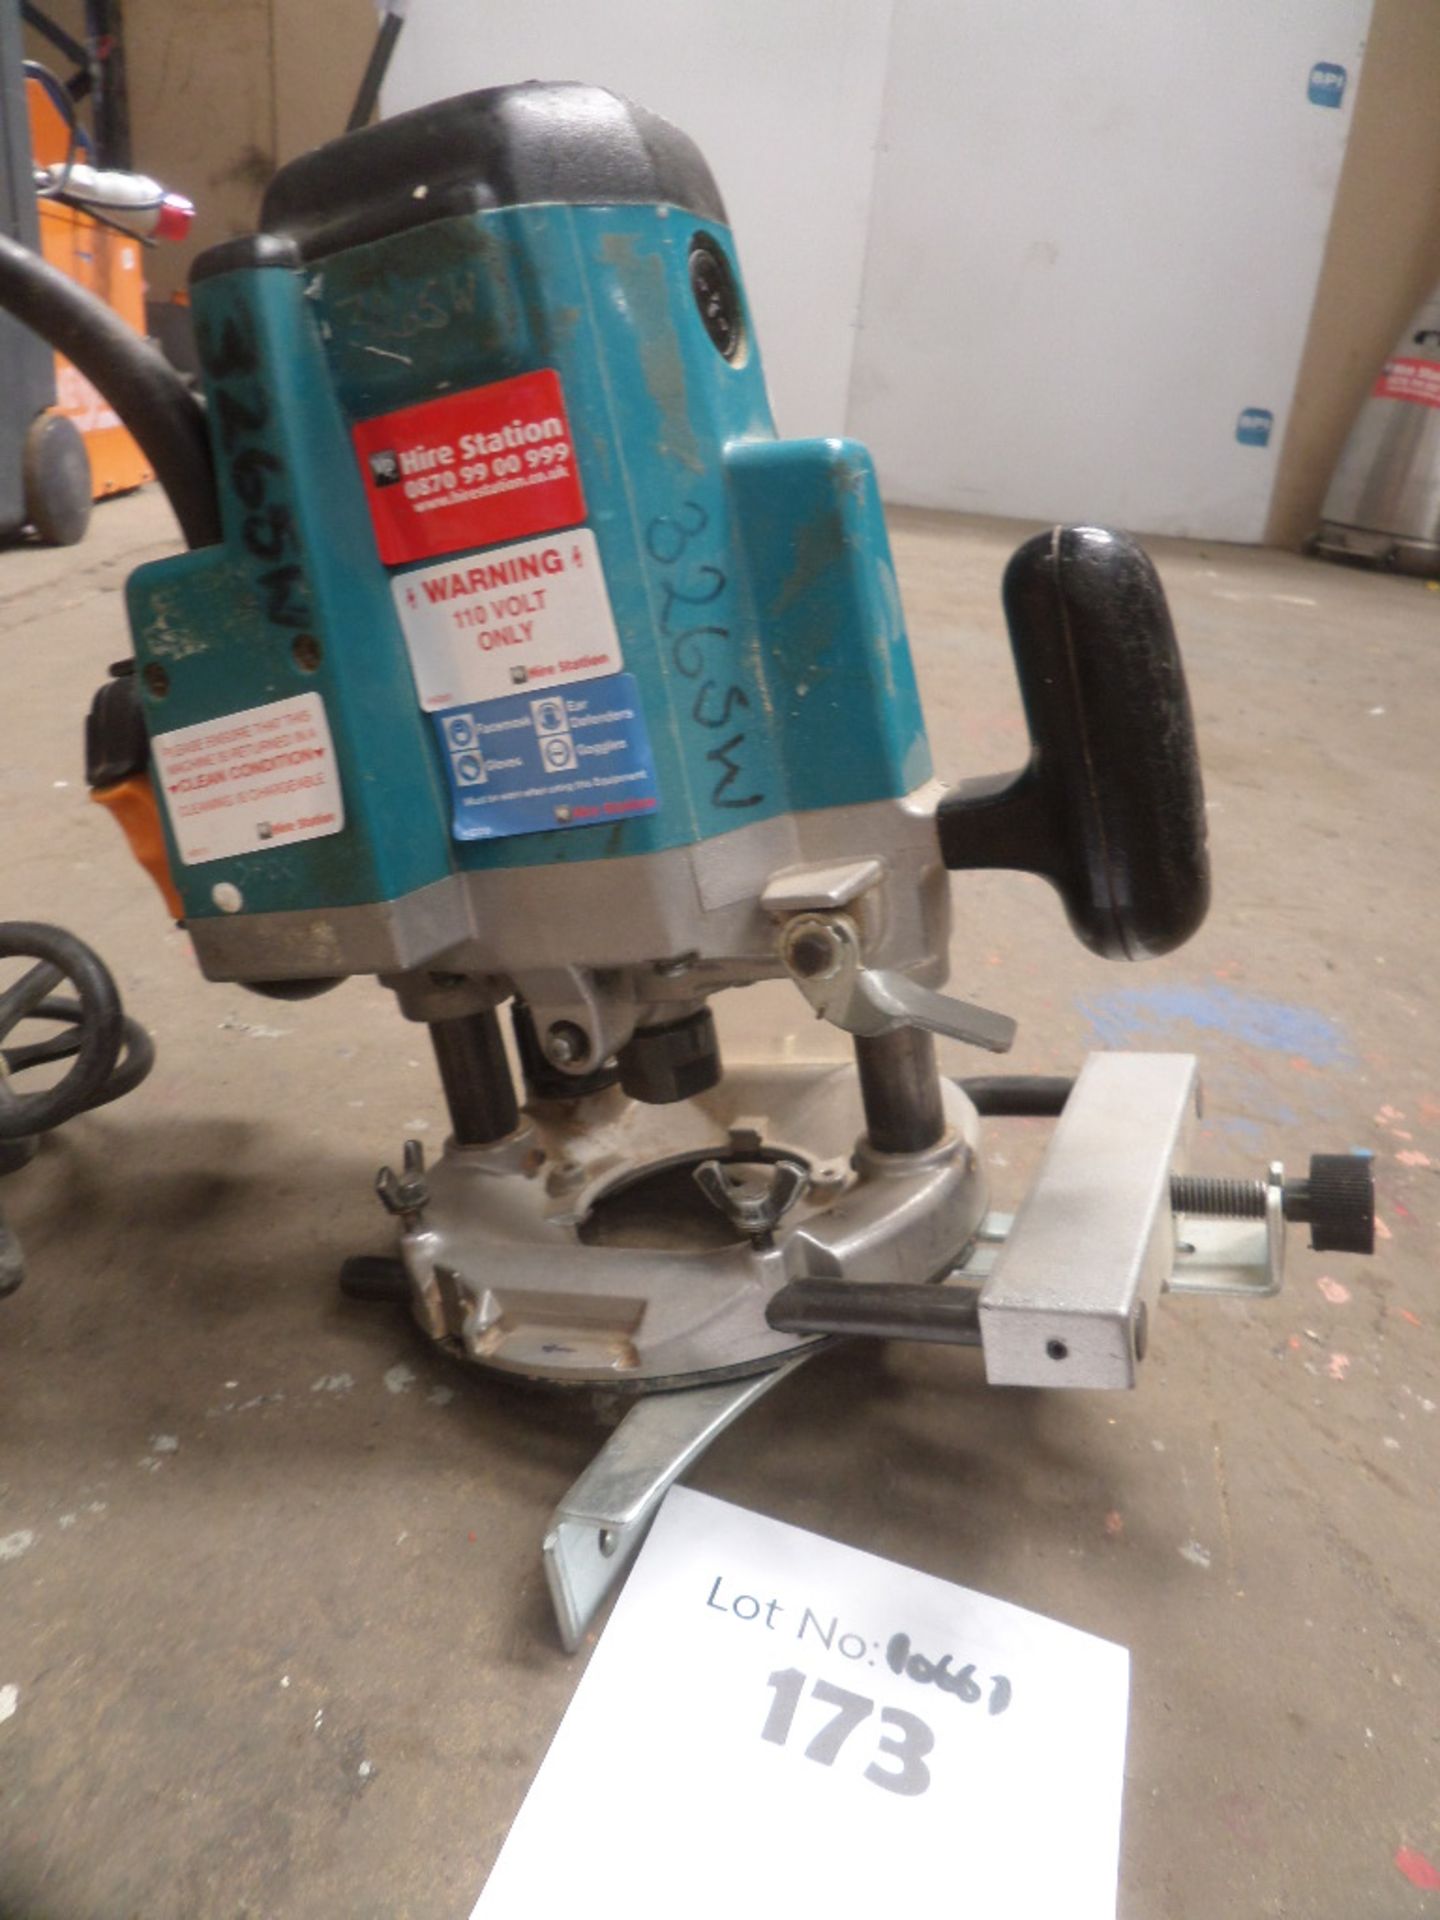 MAKITA 3612 {032200} ROUTER 6-13MM COLLET 110v 16amp connection - power there and appears to be work